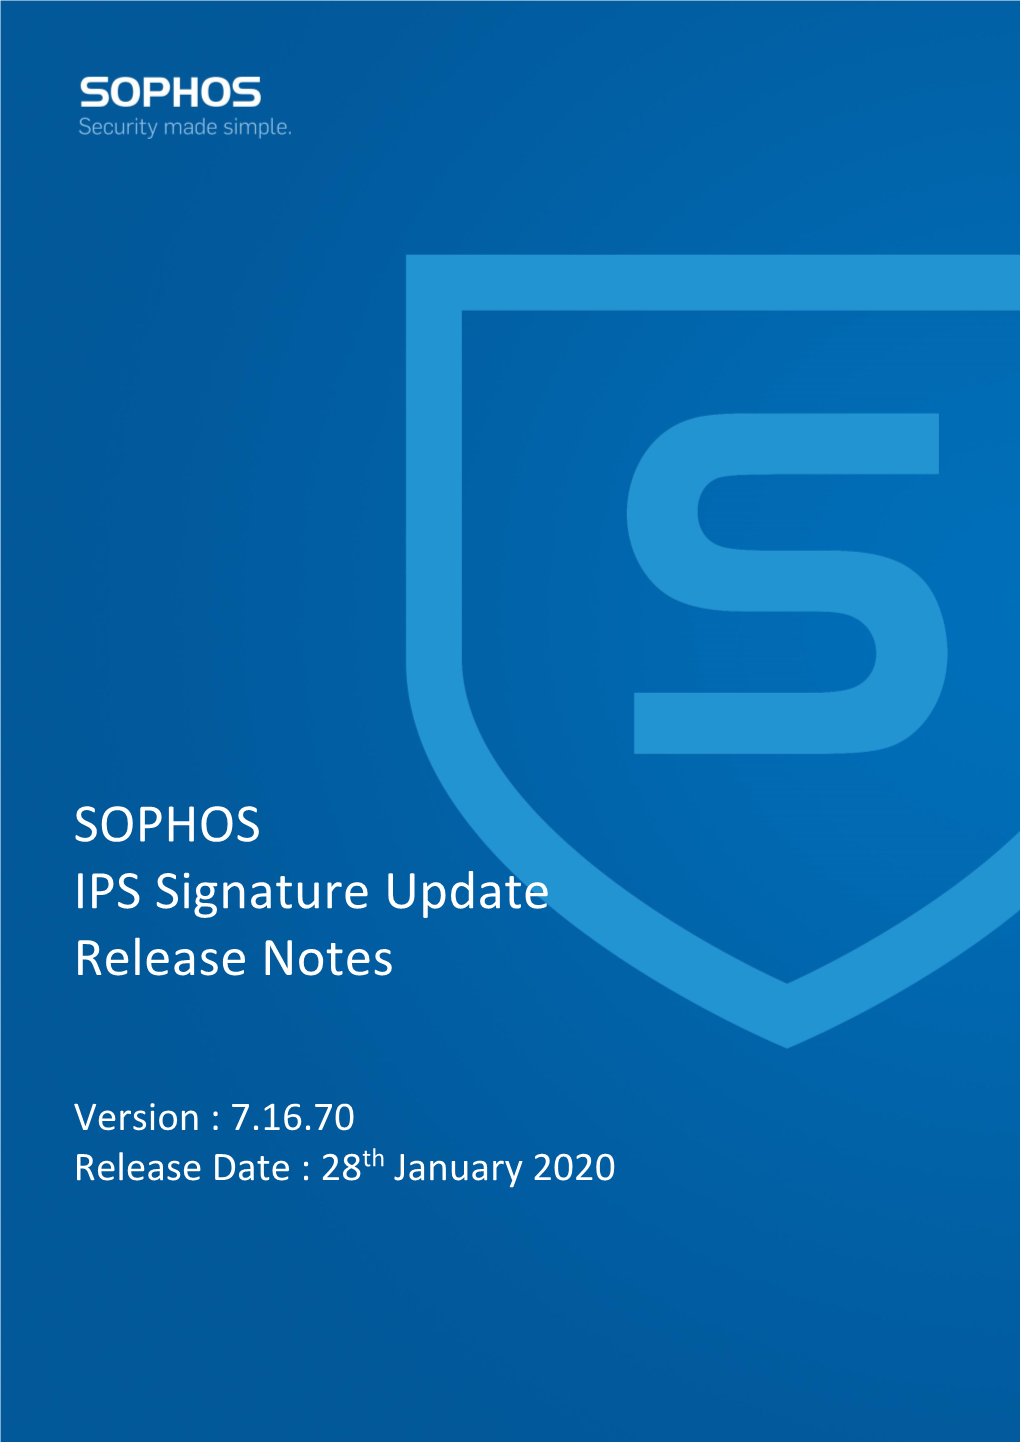 IPS Signature Release Note V7.16.70